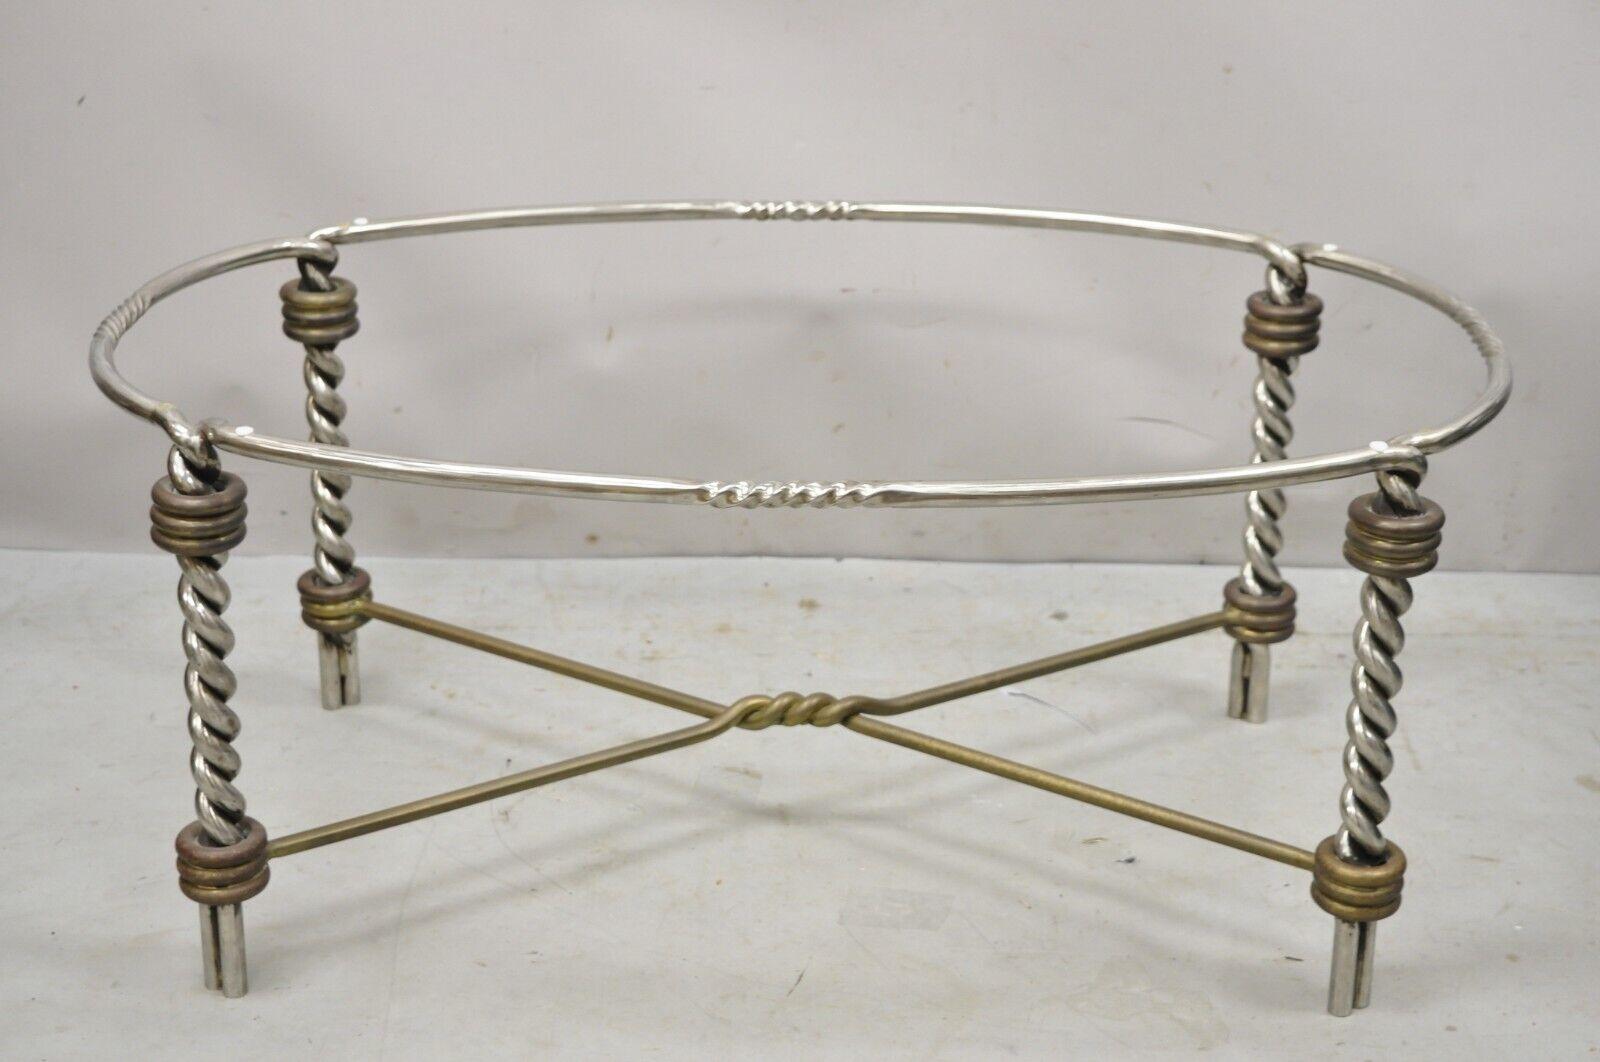 Vintage Steel and Bronze Neoclassical Style Twisted Metal Oval Coffee Table For Sale 5